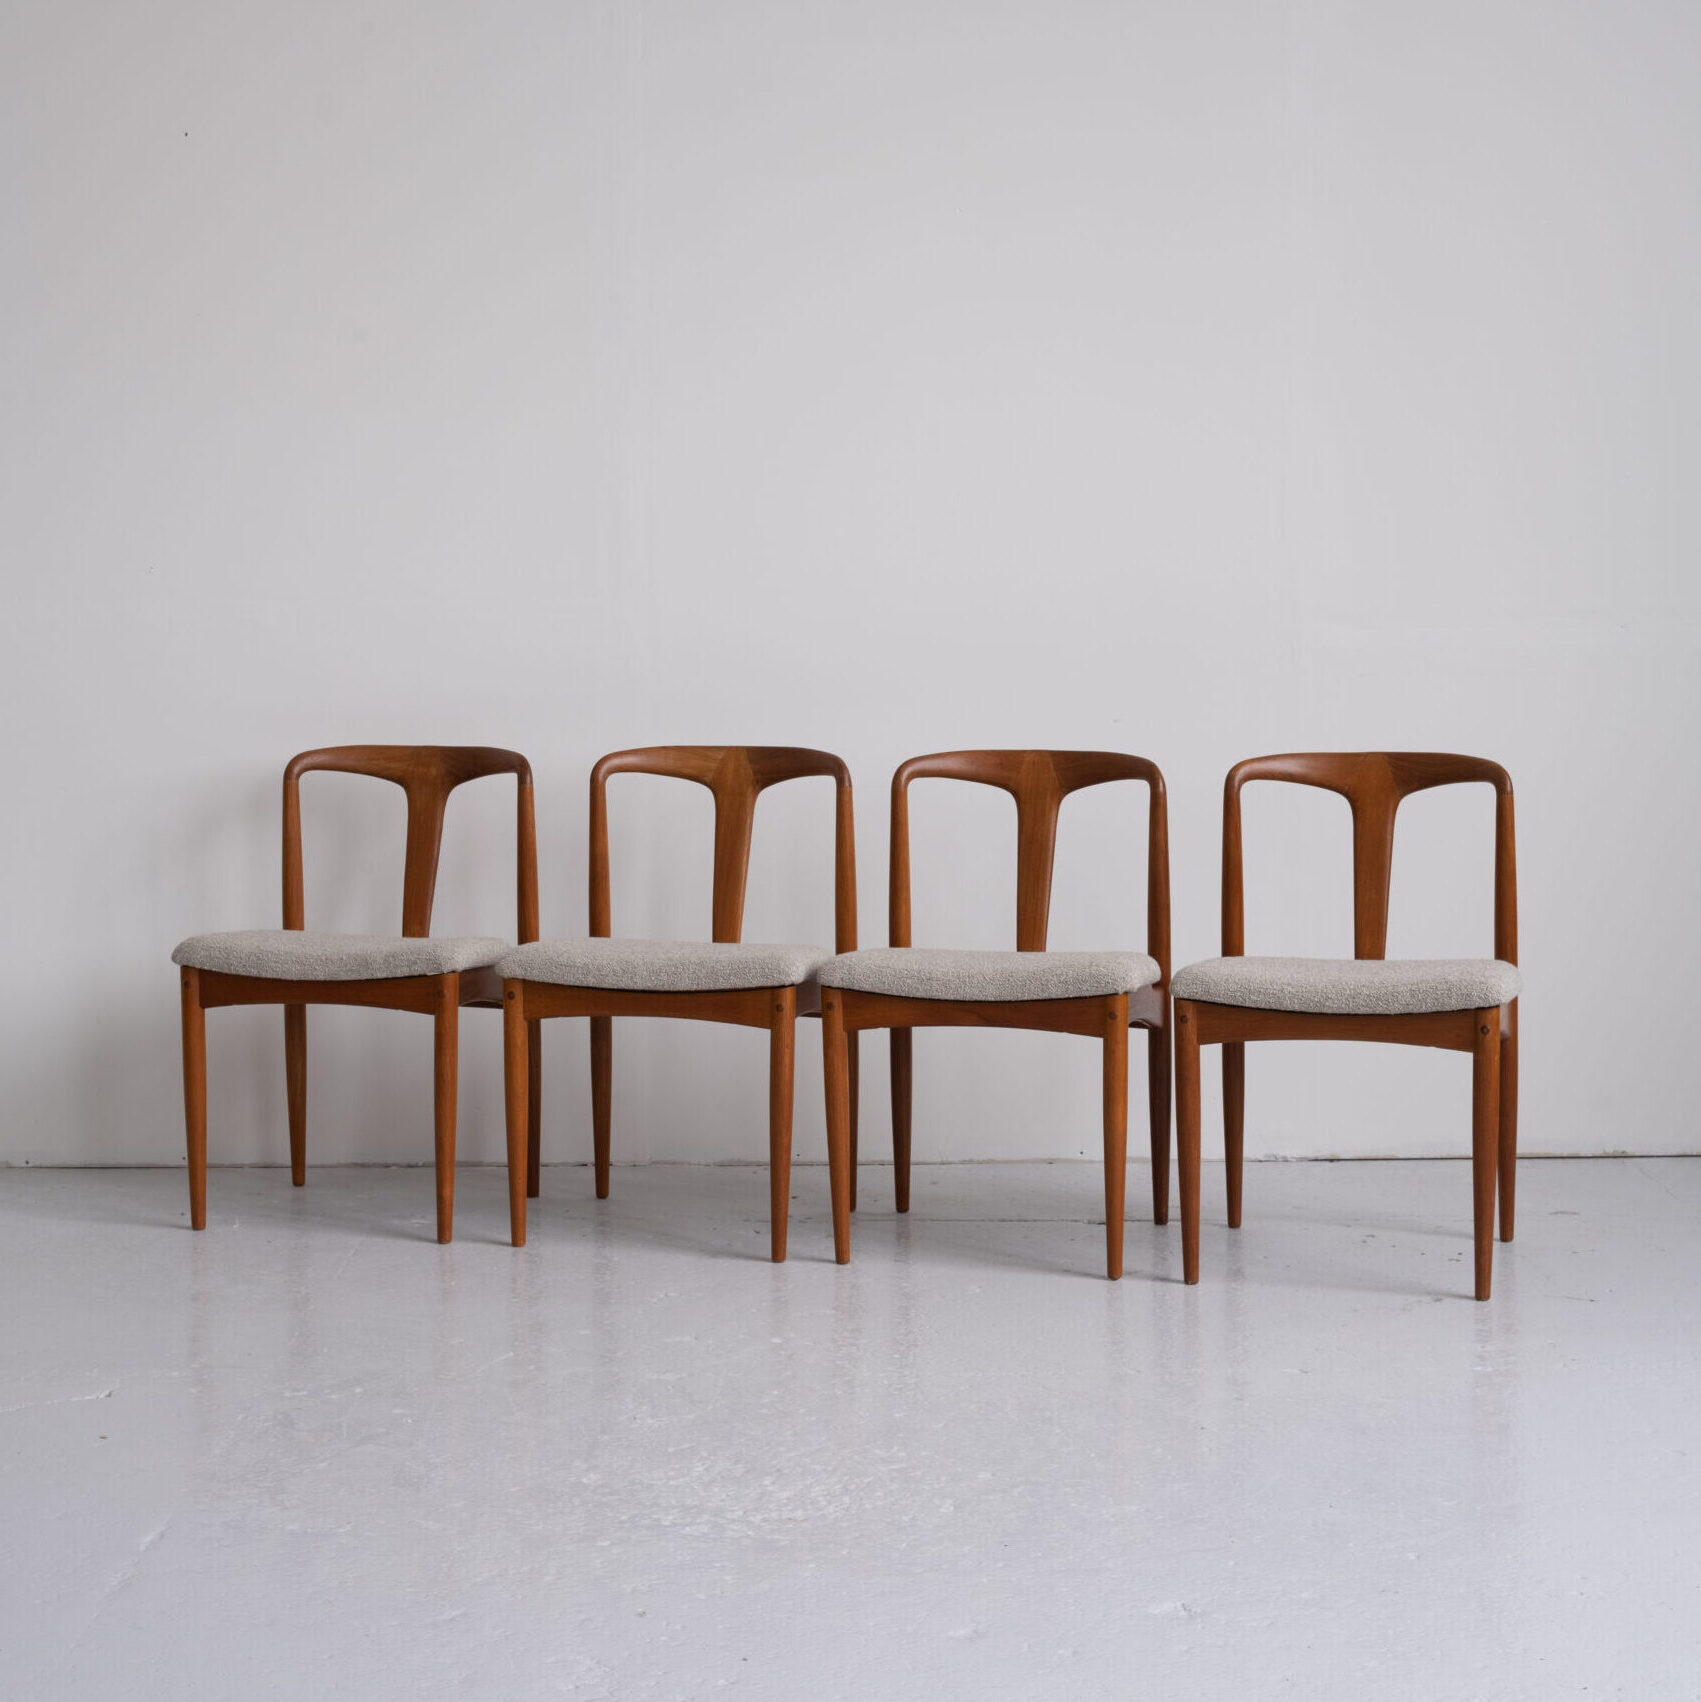 Johannes Andersen chairs [reserved]